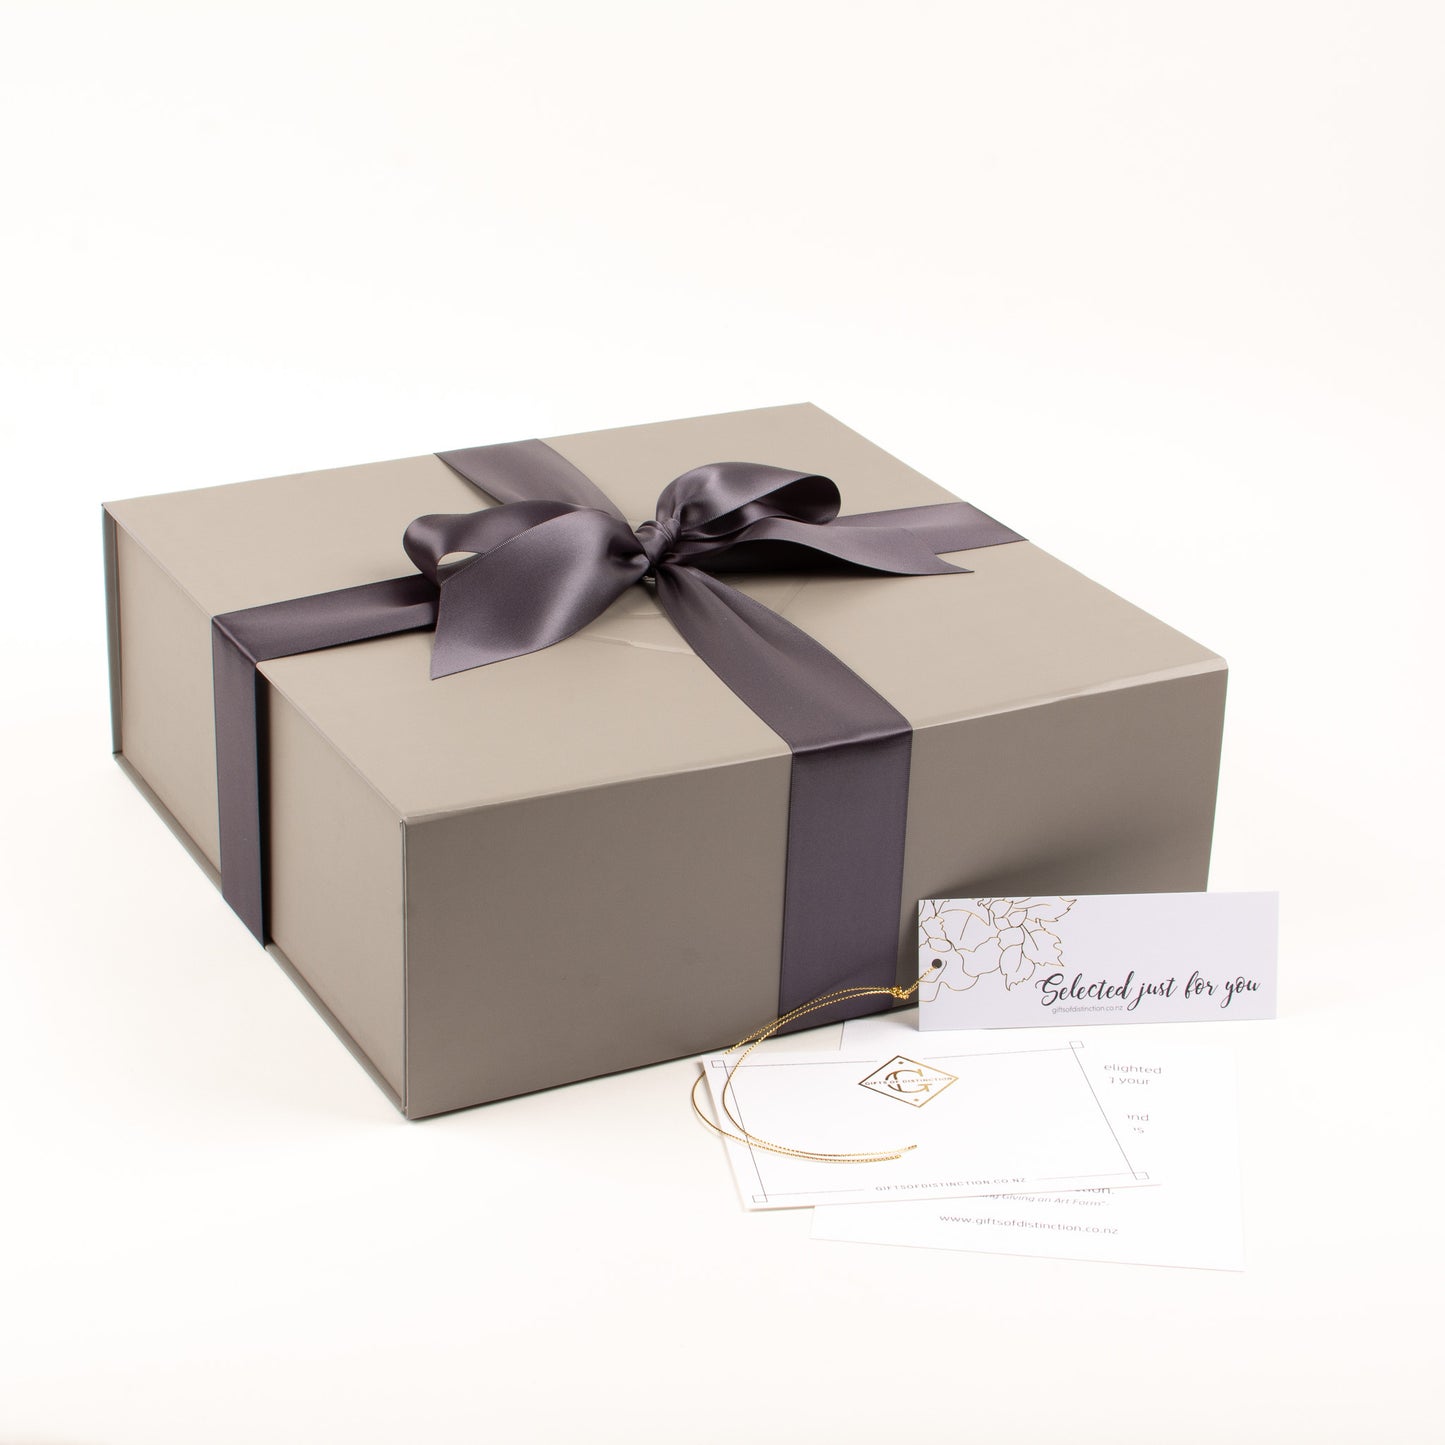 Local Harvest Elite - Gift Boxes NZ - Gifts of Distinction